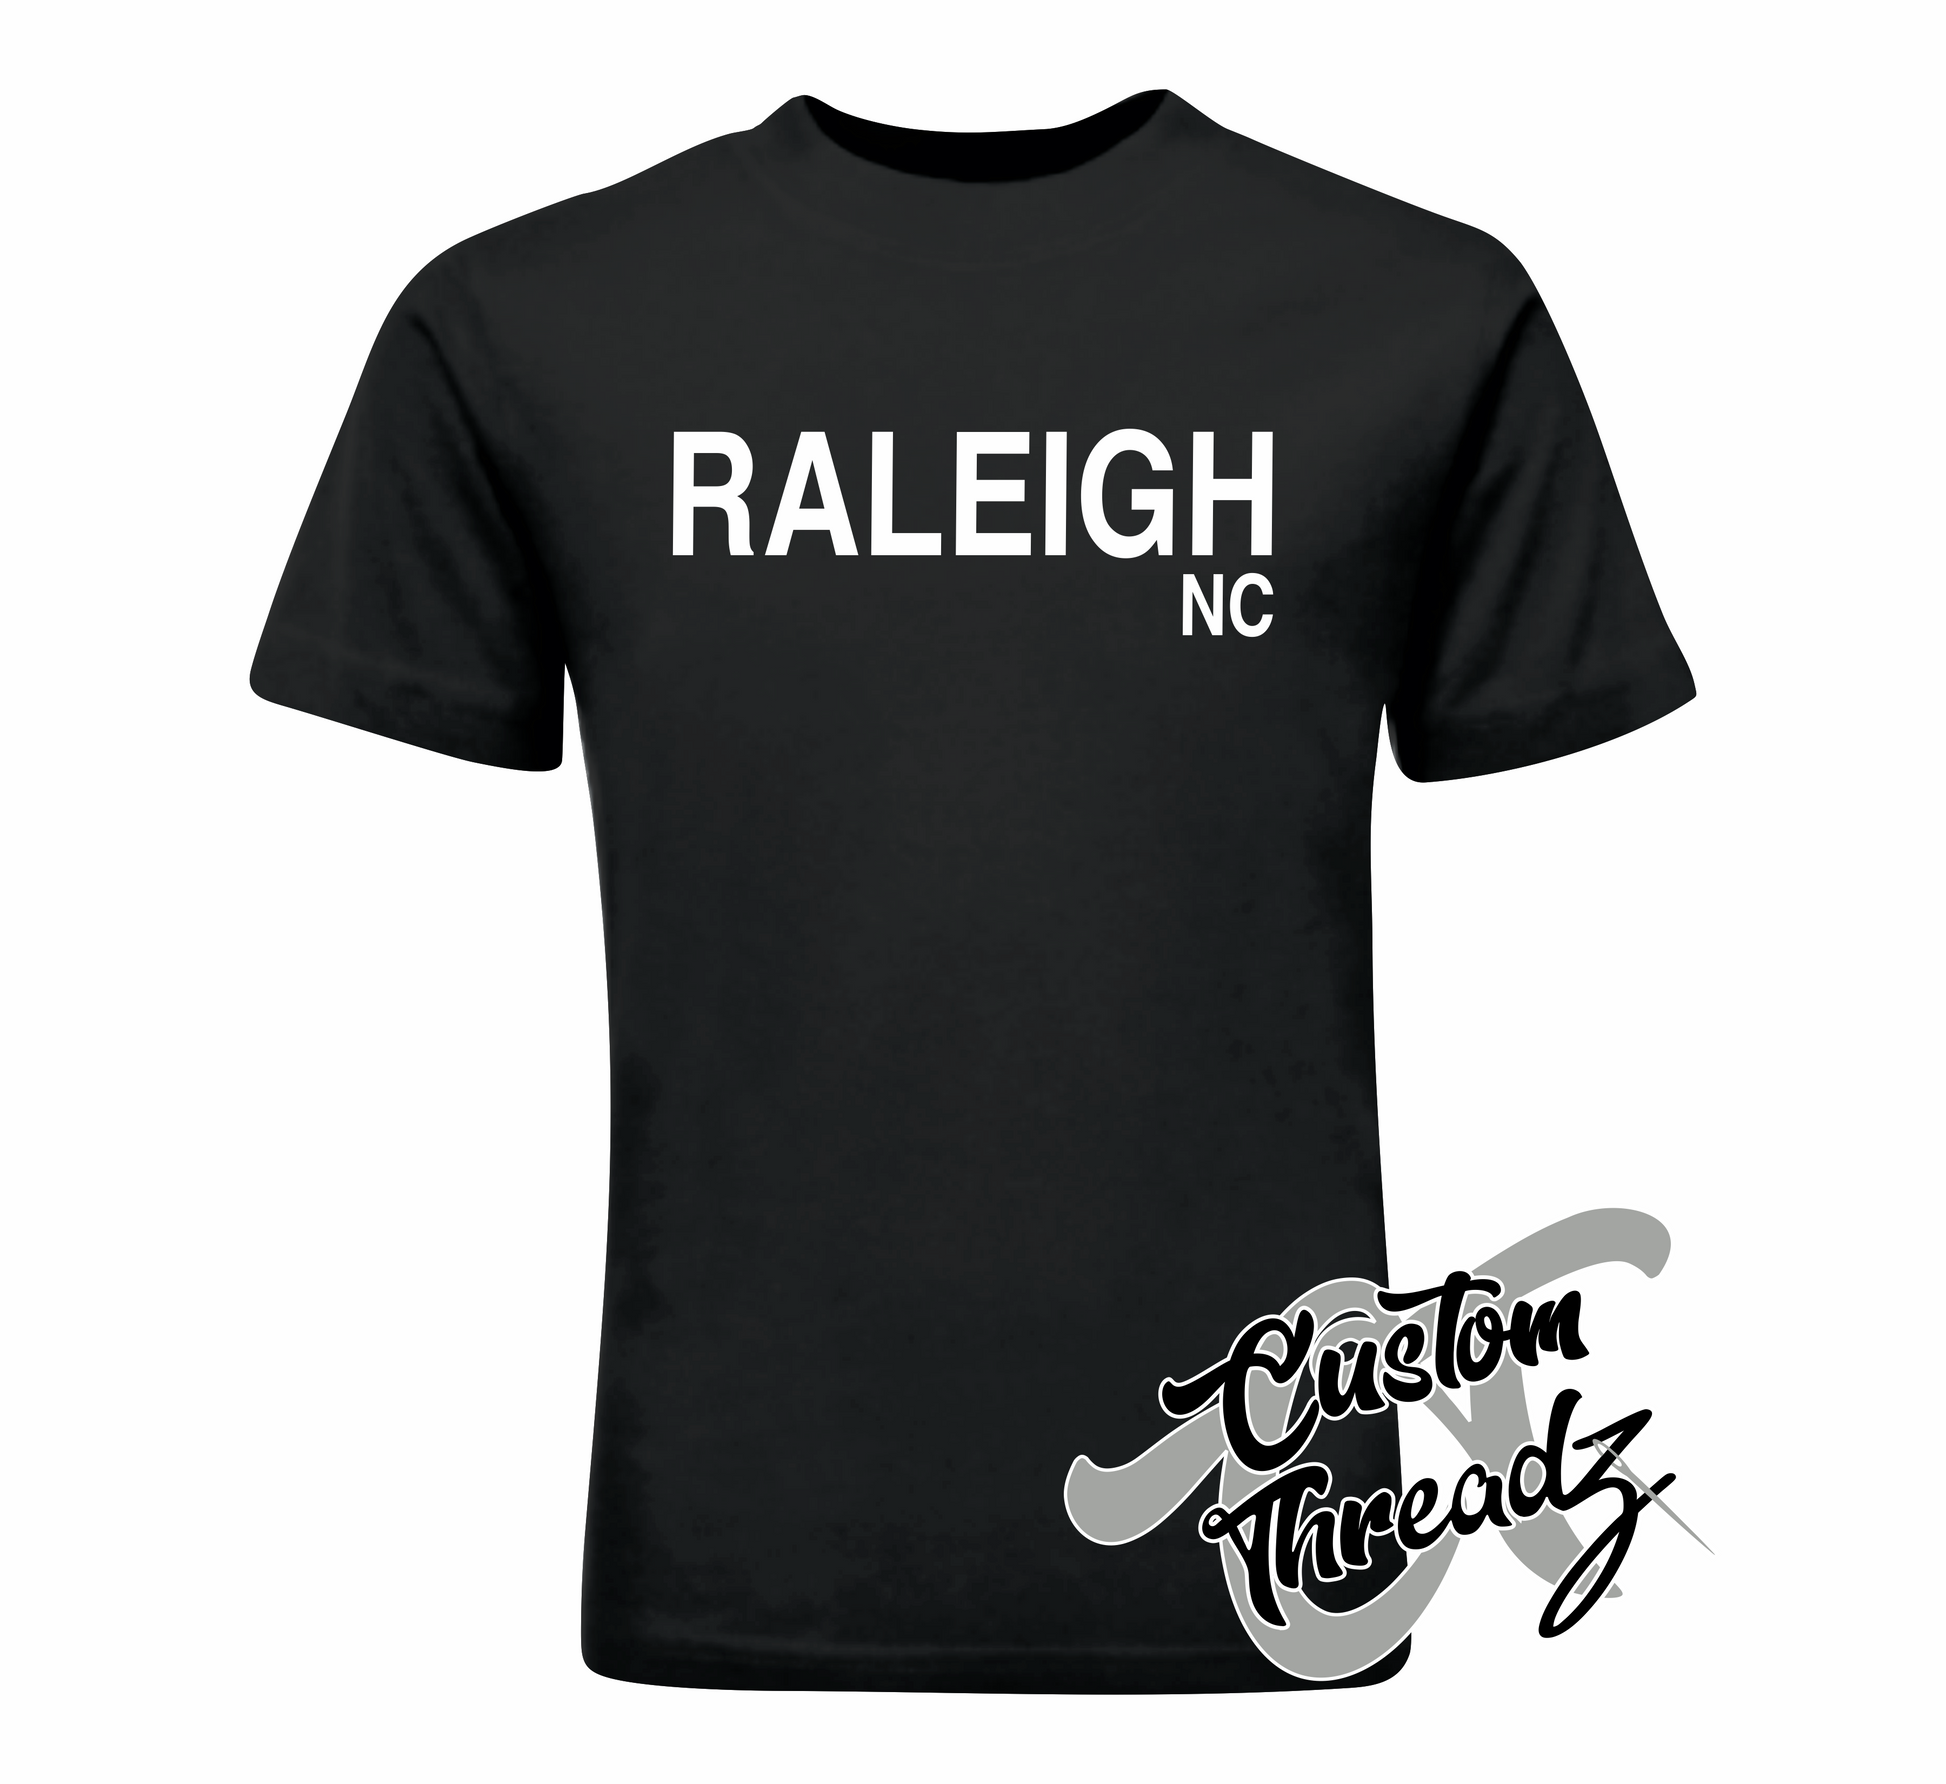 black tee with raleigh nc DTG printed design